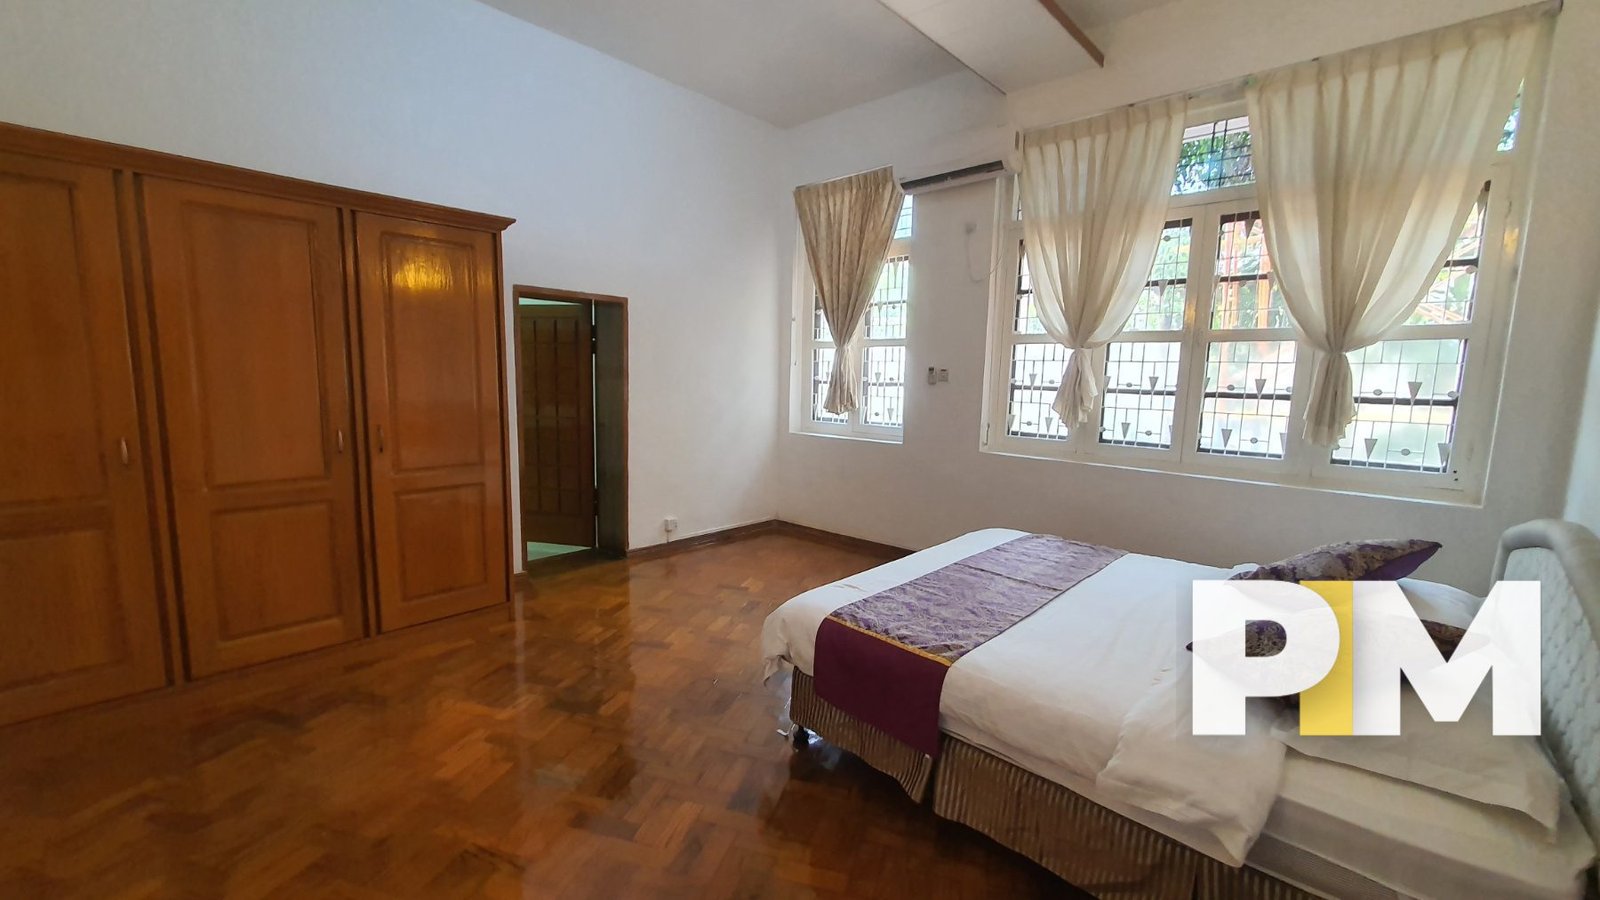 Bedroom with curtains - Property in Yangon